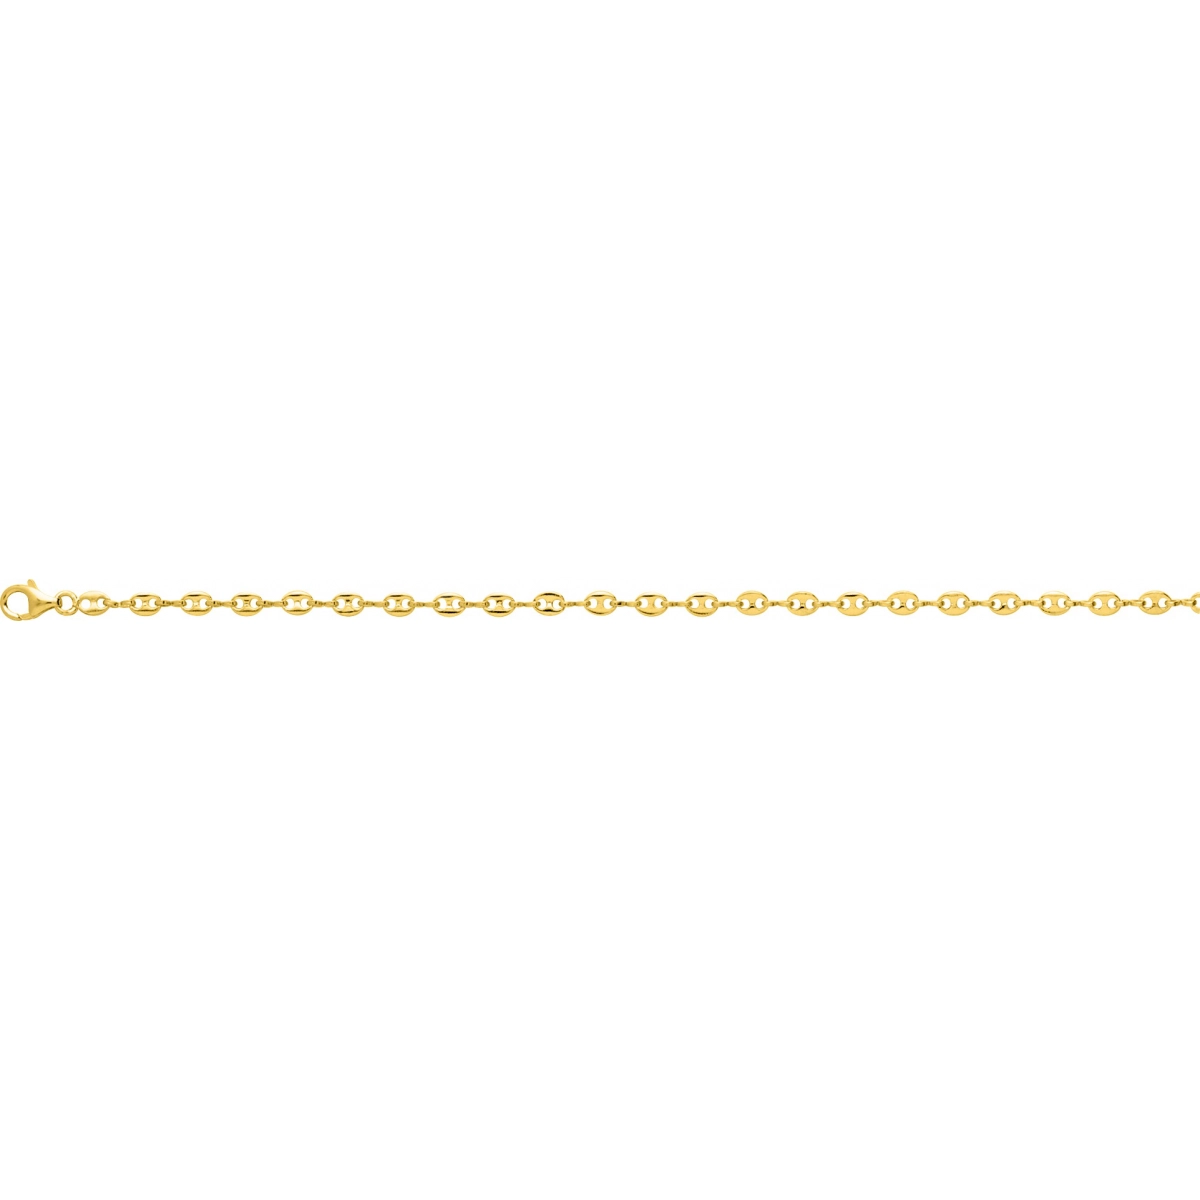 Necklace gold plated Brass - Size: 42  Lua Blanca  101159C.42